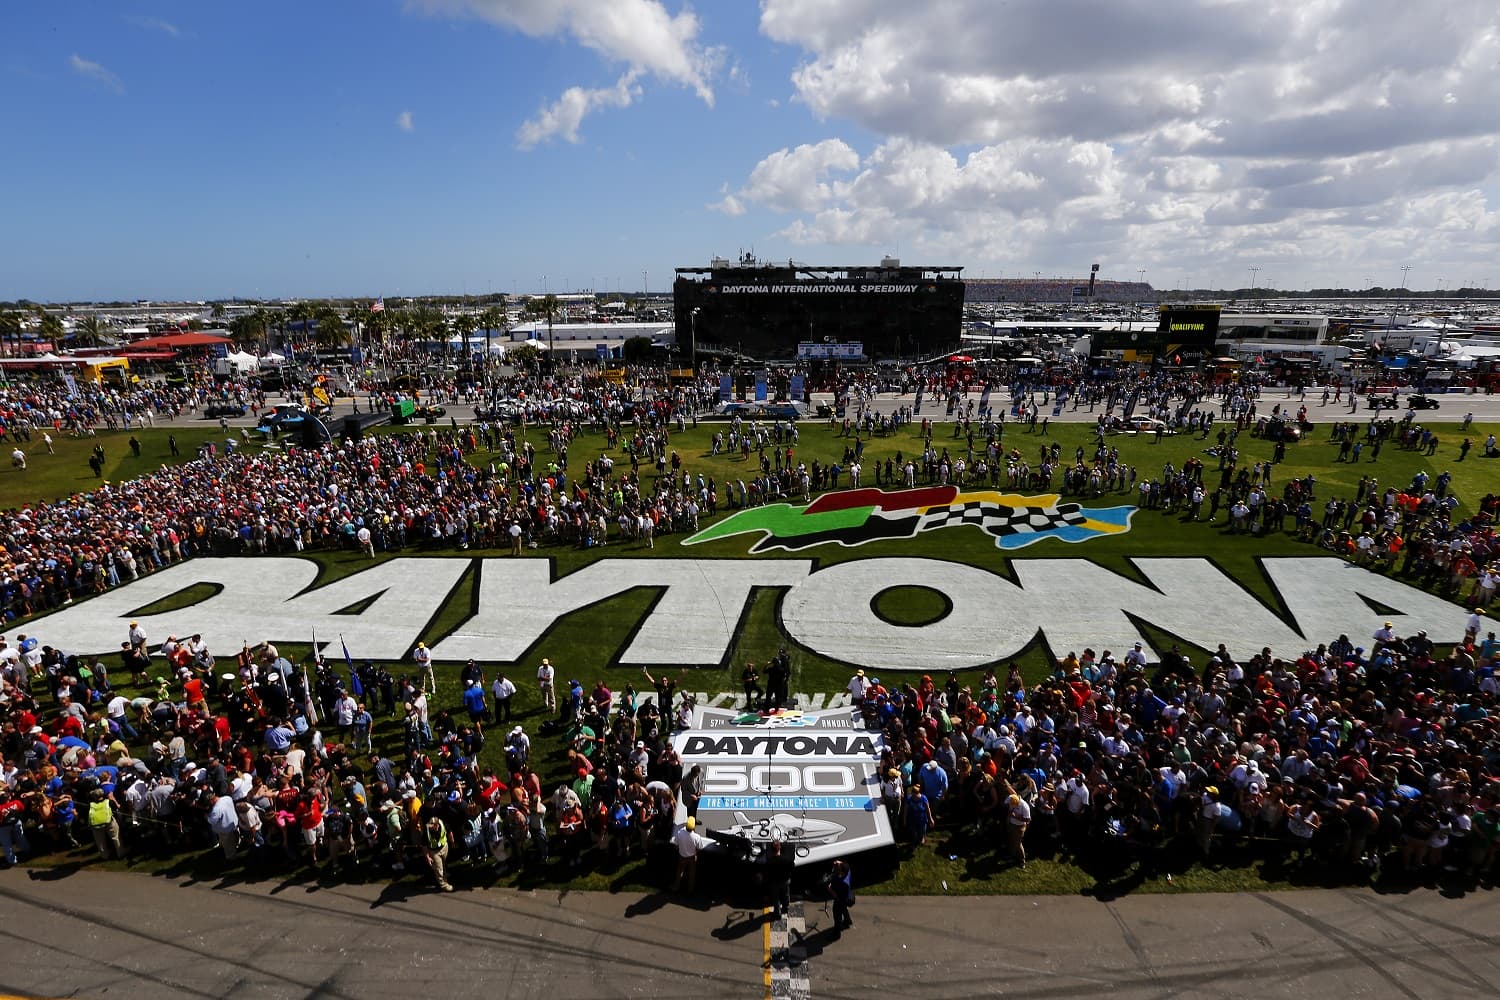 A general view of the infield prior to the NASCAR Daytona 500 on Feb. 22, 2015. | Jonathan Ferrey/NASCAR via Getty Images